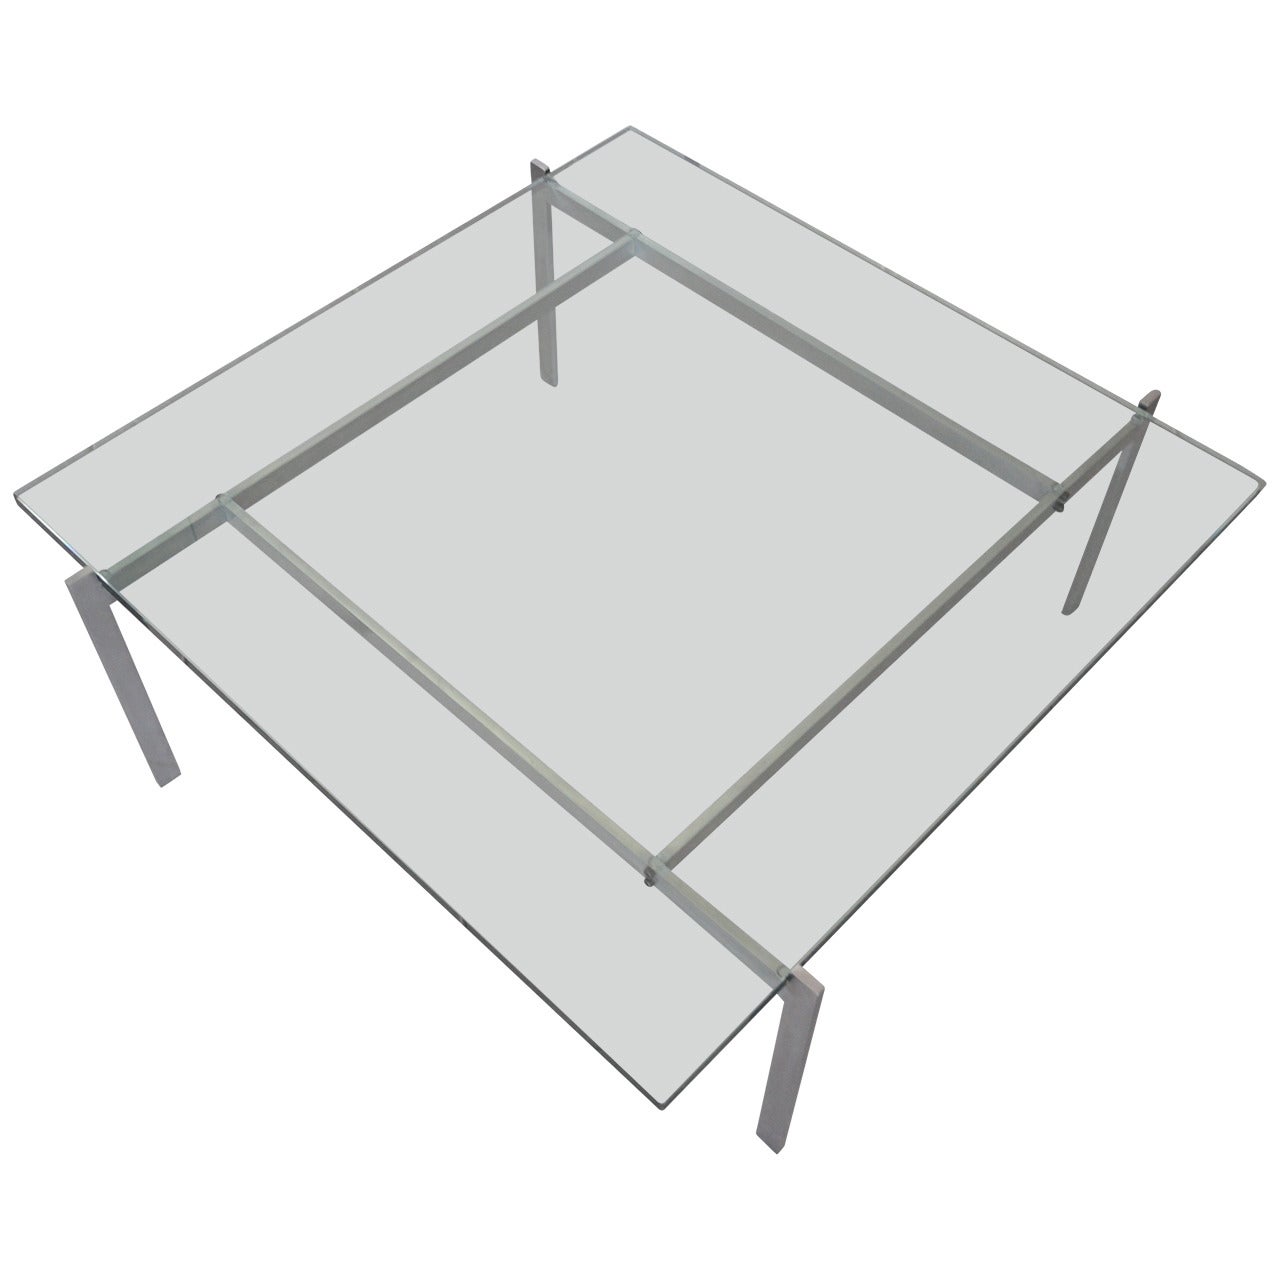 PK61 Coffee Table by Poul Kjaerholm Manufactured by E. Kold Christensen For Sale